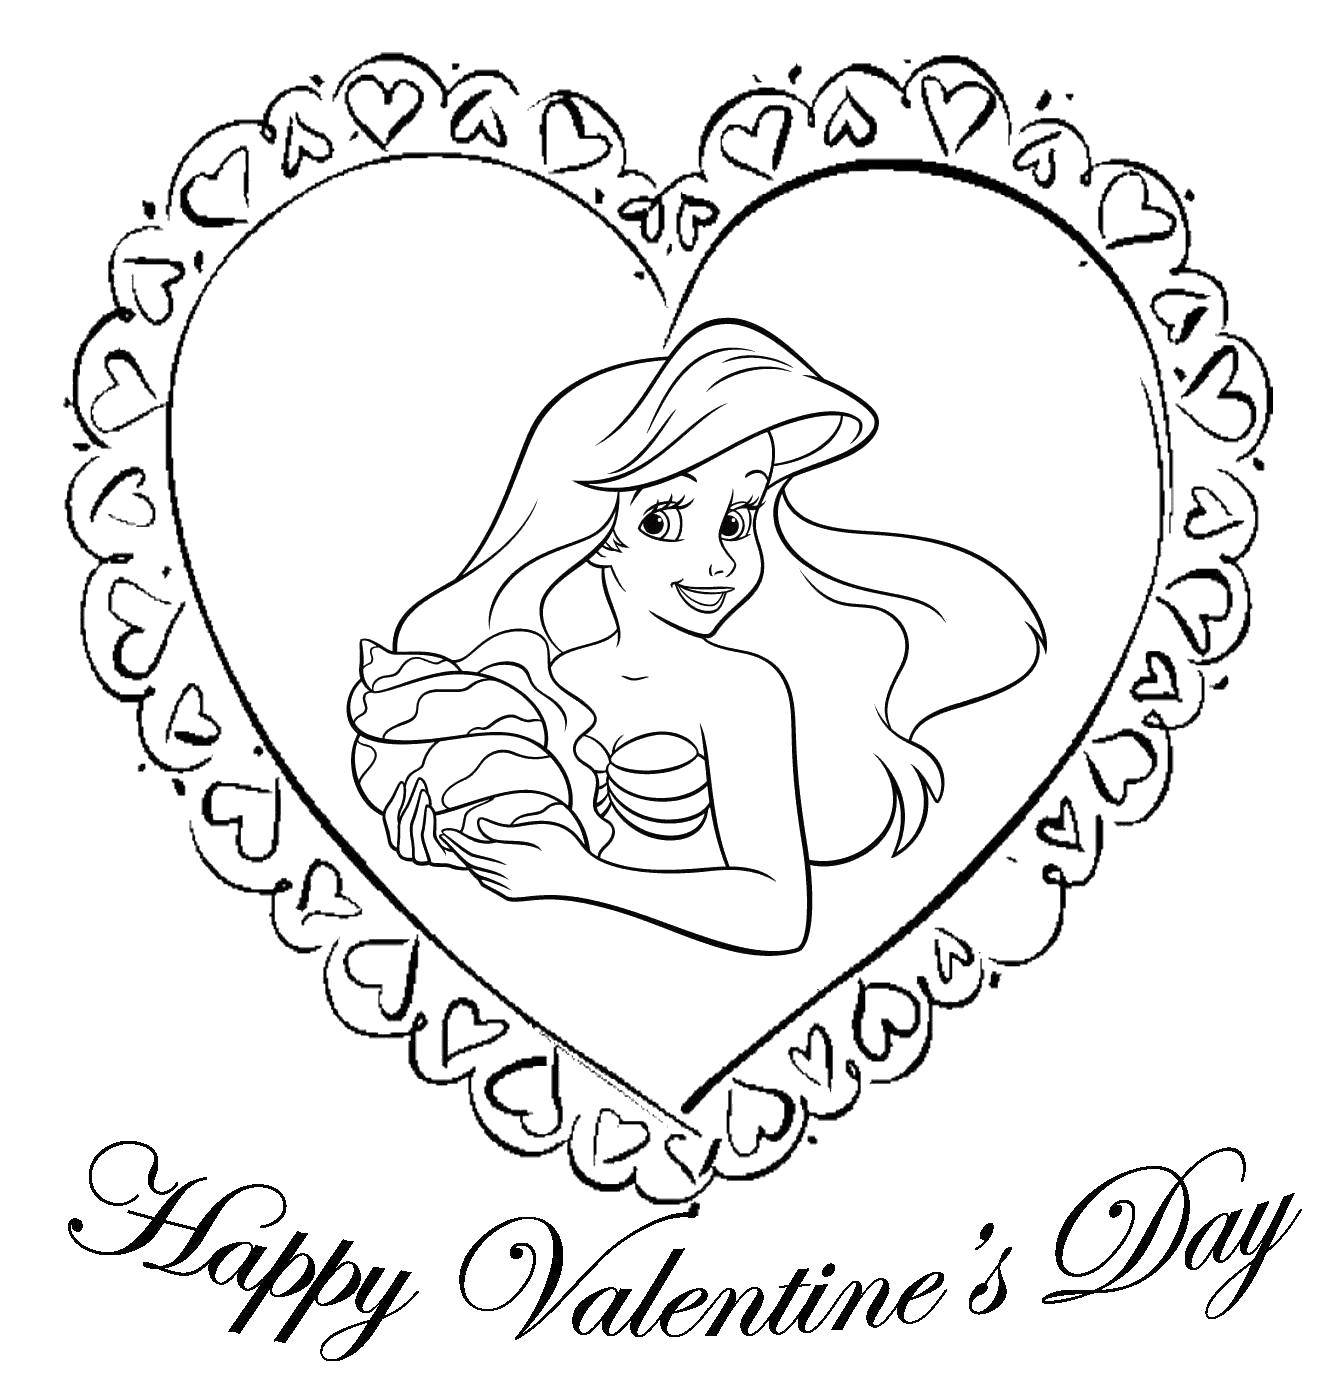 Coloring The little mermaid Ariel from the disney cartoon congratulates with the day of St. Valentina. Category Valentines day. Tags:  Valentines day, love, heart, Ariel.